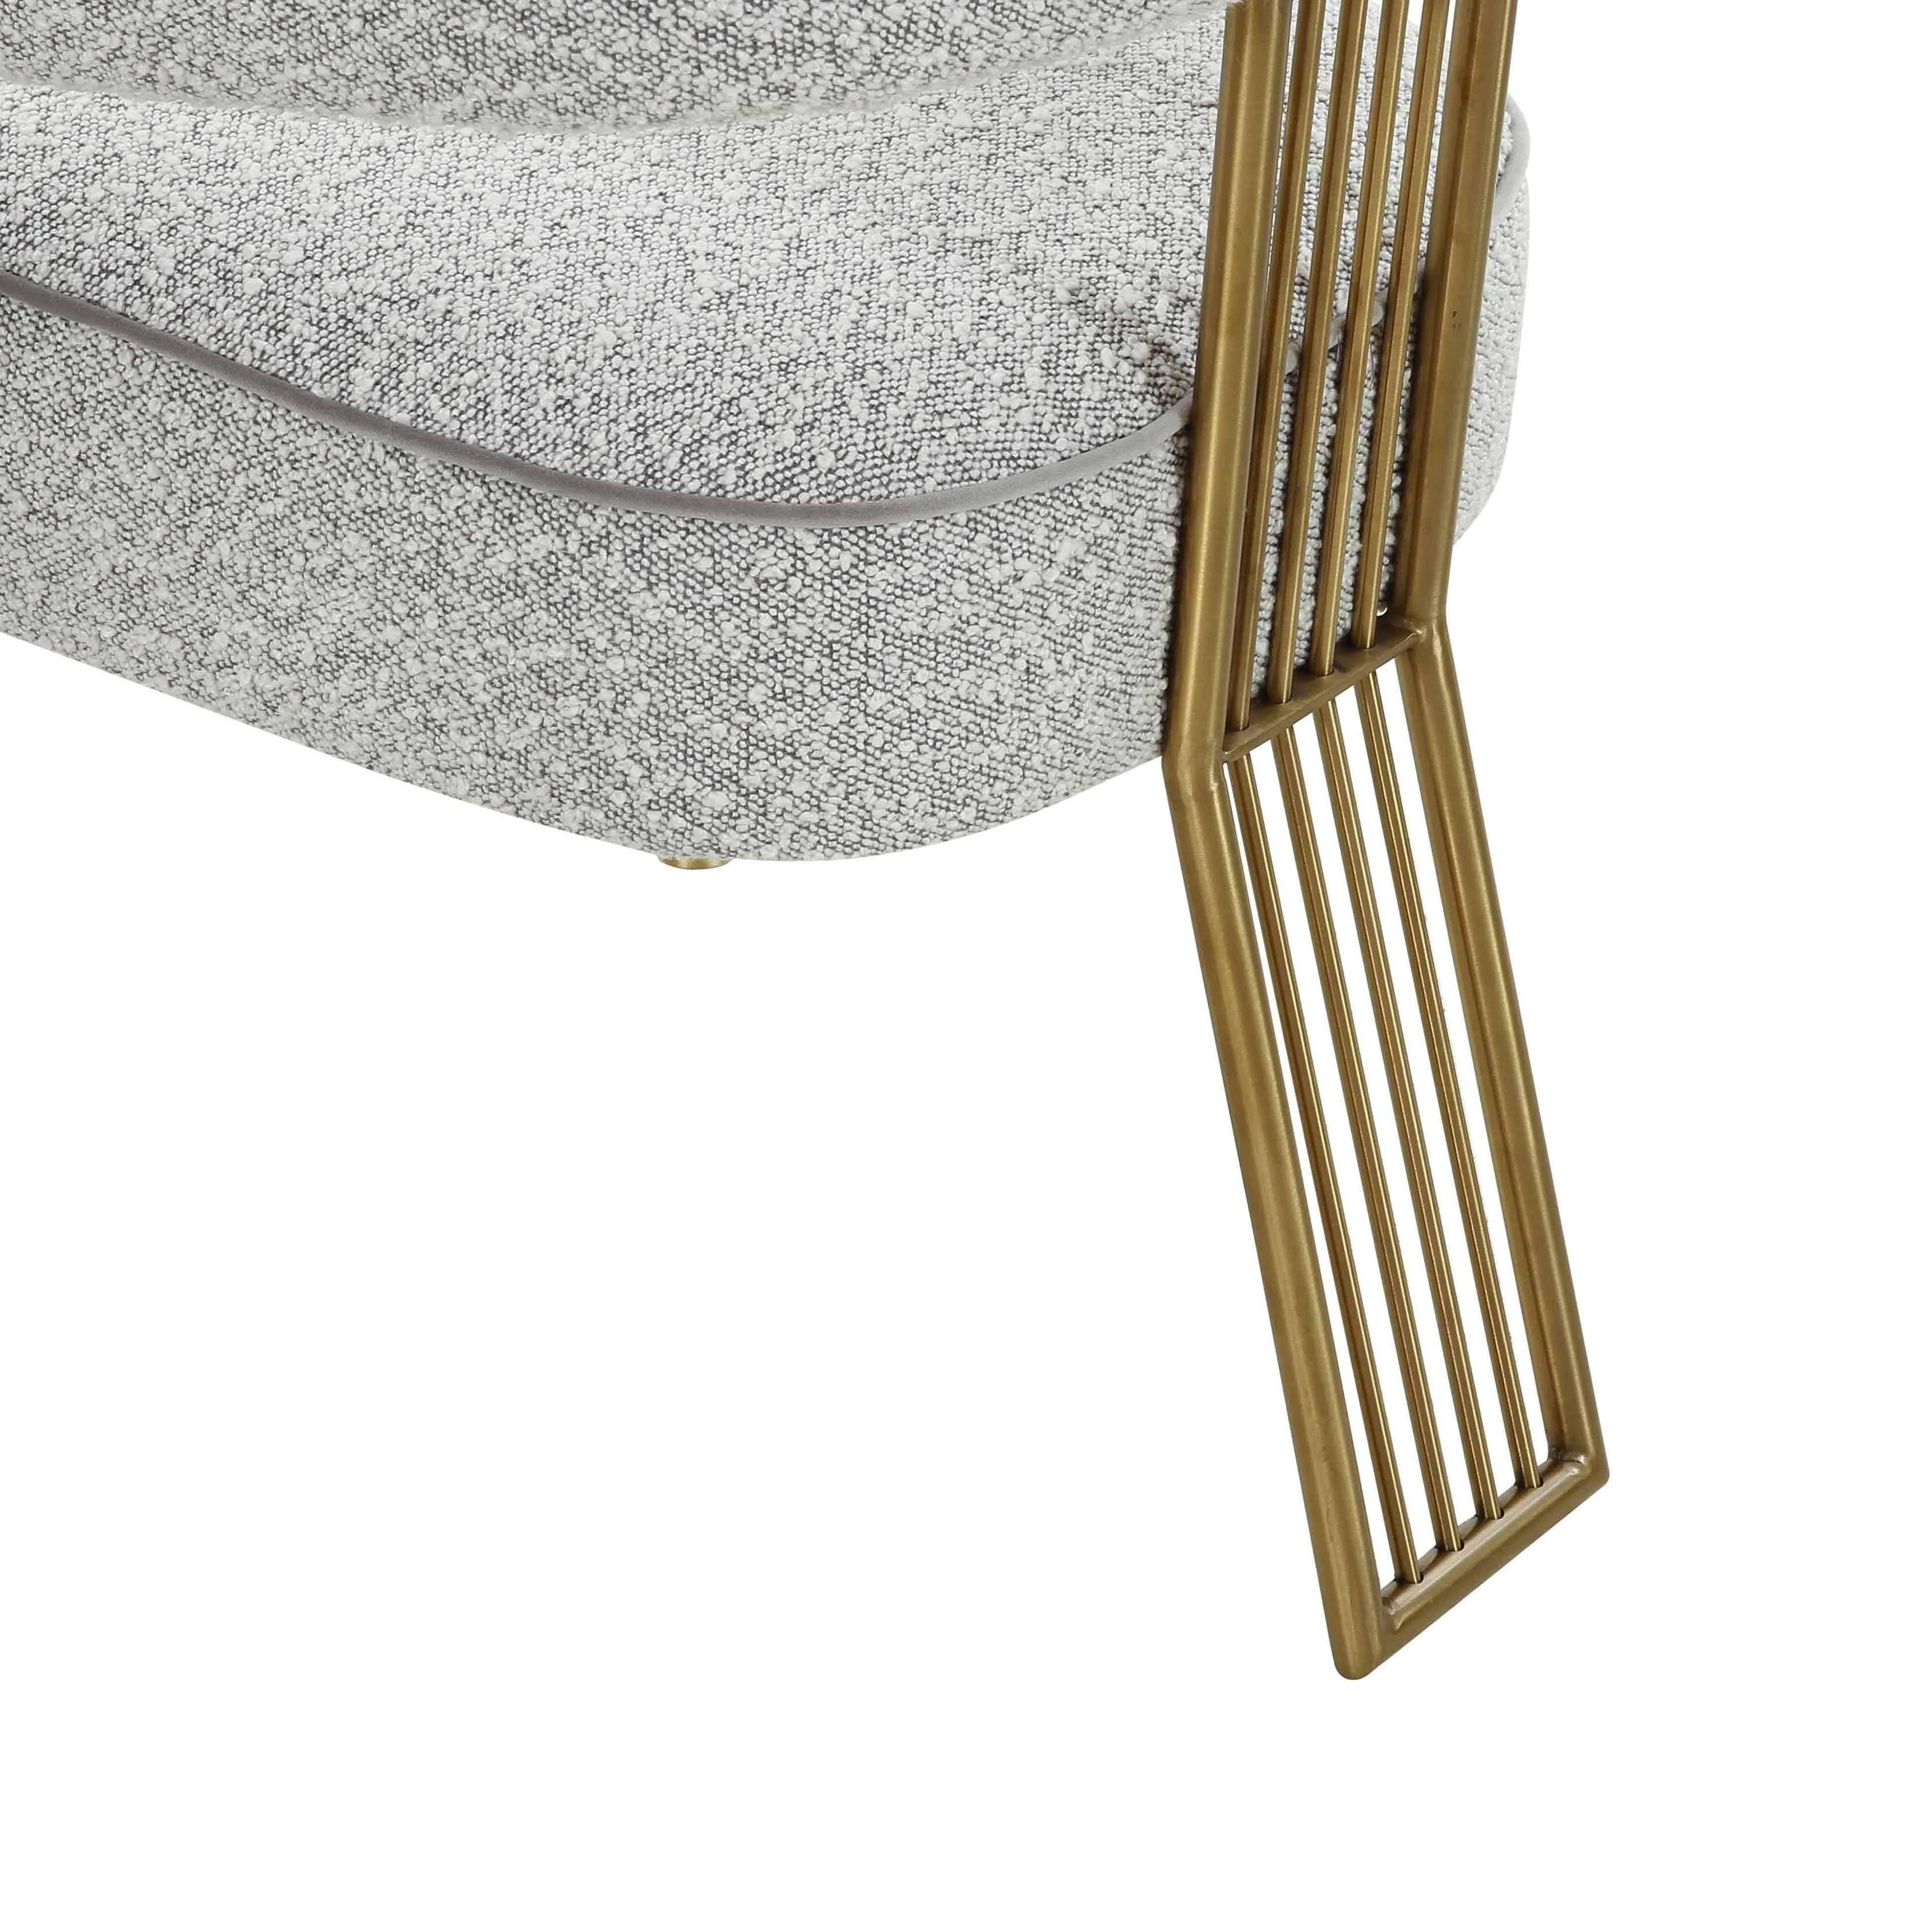 Corralis Speckled Grey Boucle Dining Chair - Image 3